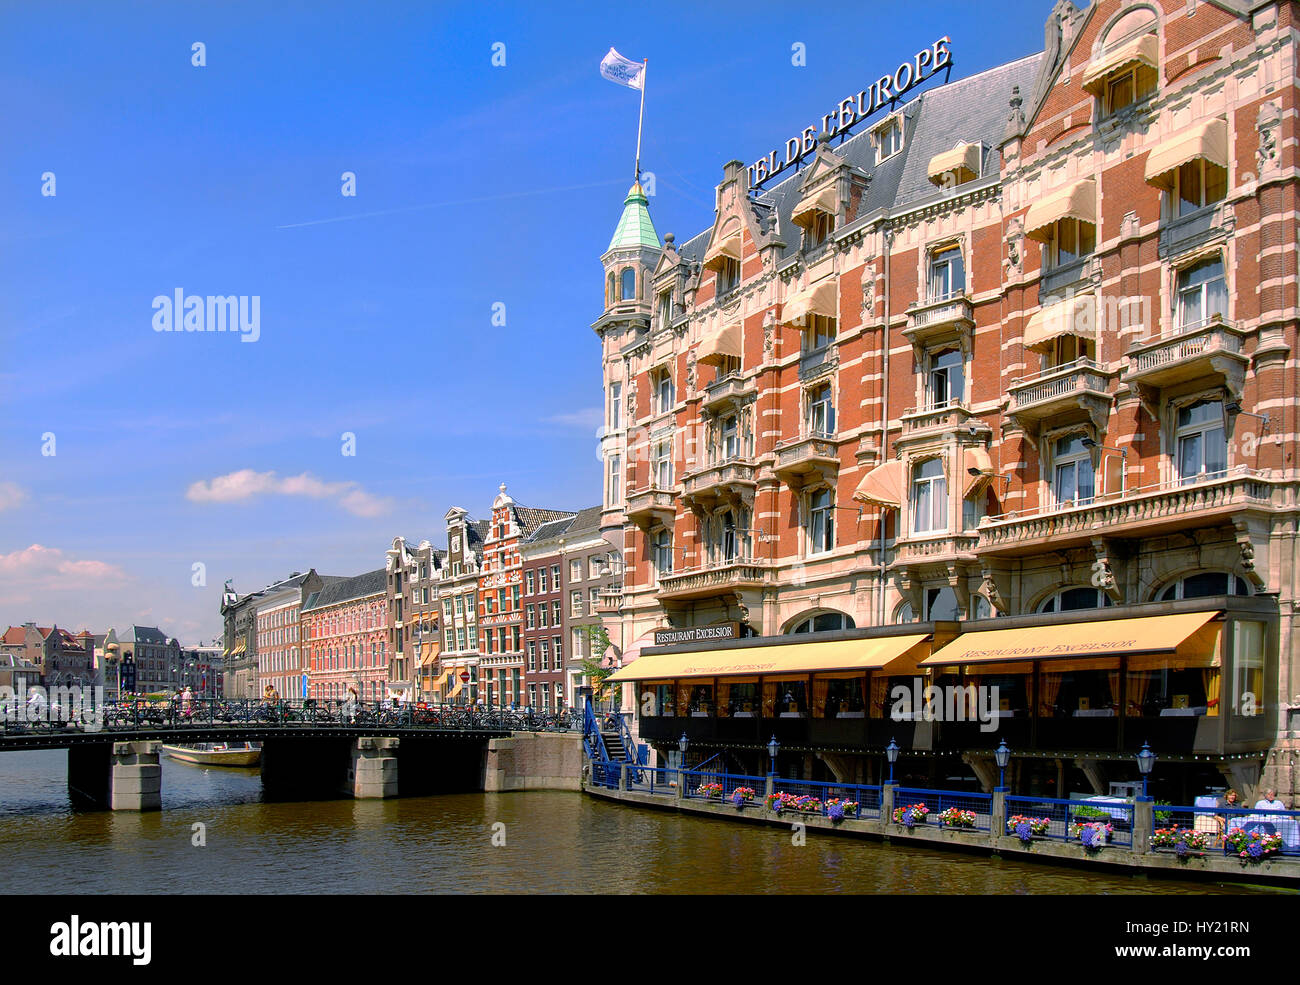 Image of  Hotel de Europe in the inner city of Amsterdam, Holland. Stock Photo